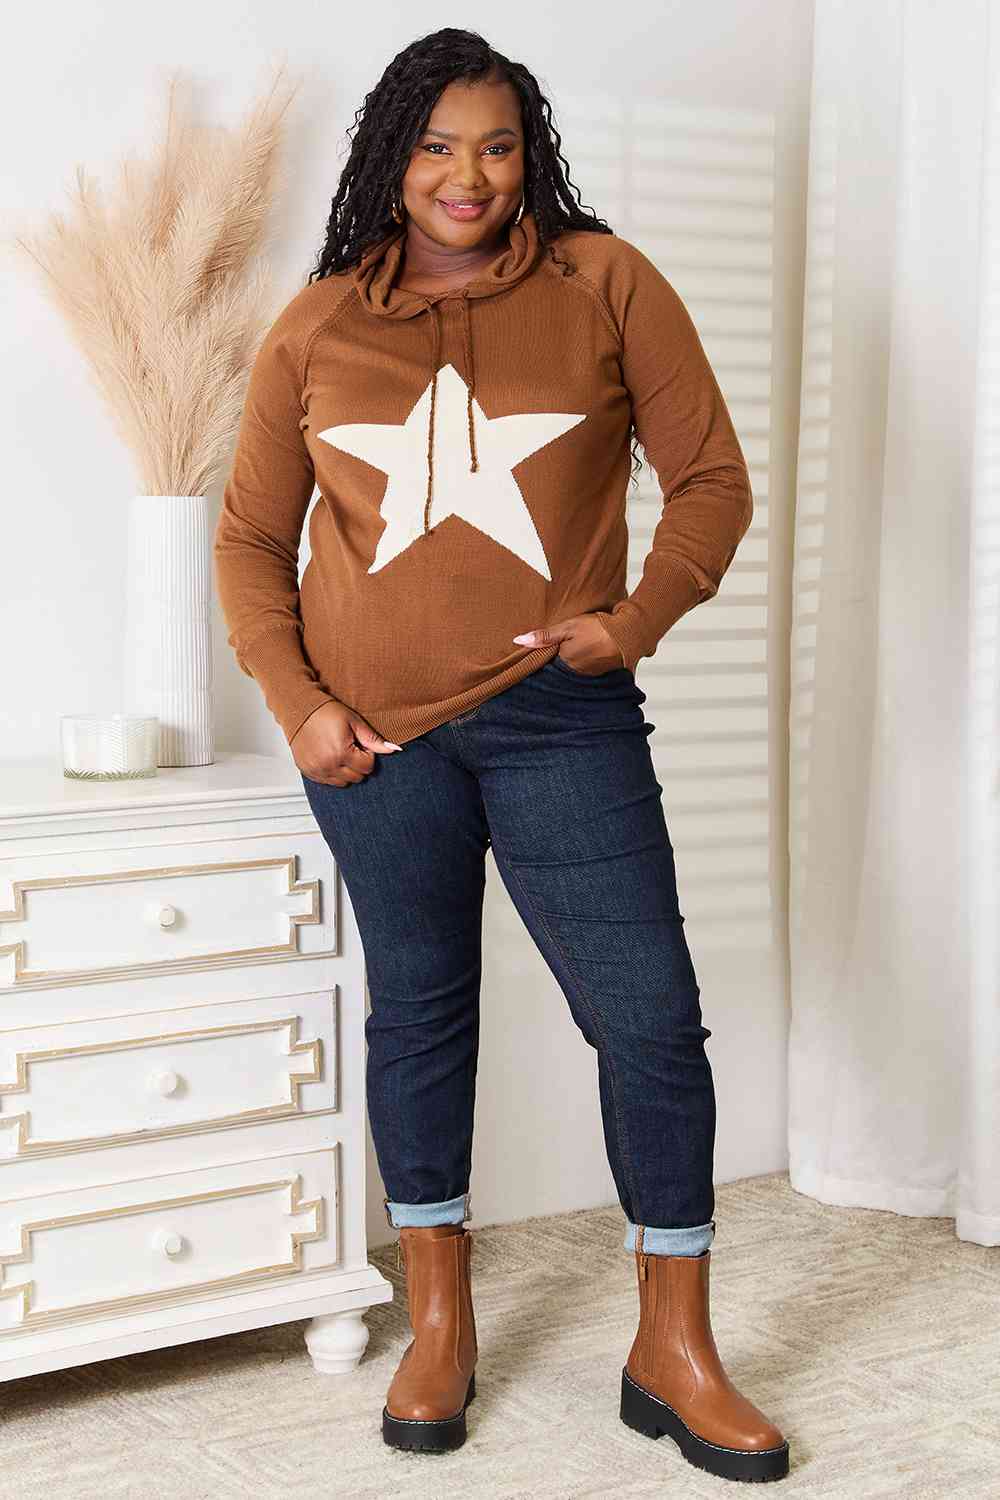 Heimish Full Size Star Graphic Hooded Sweater